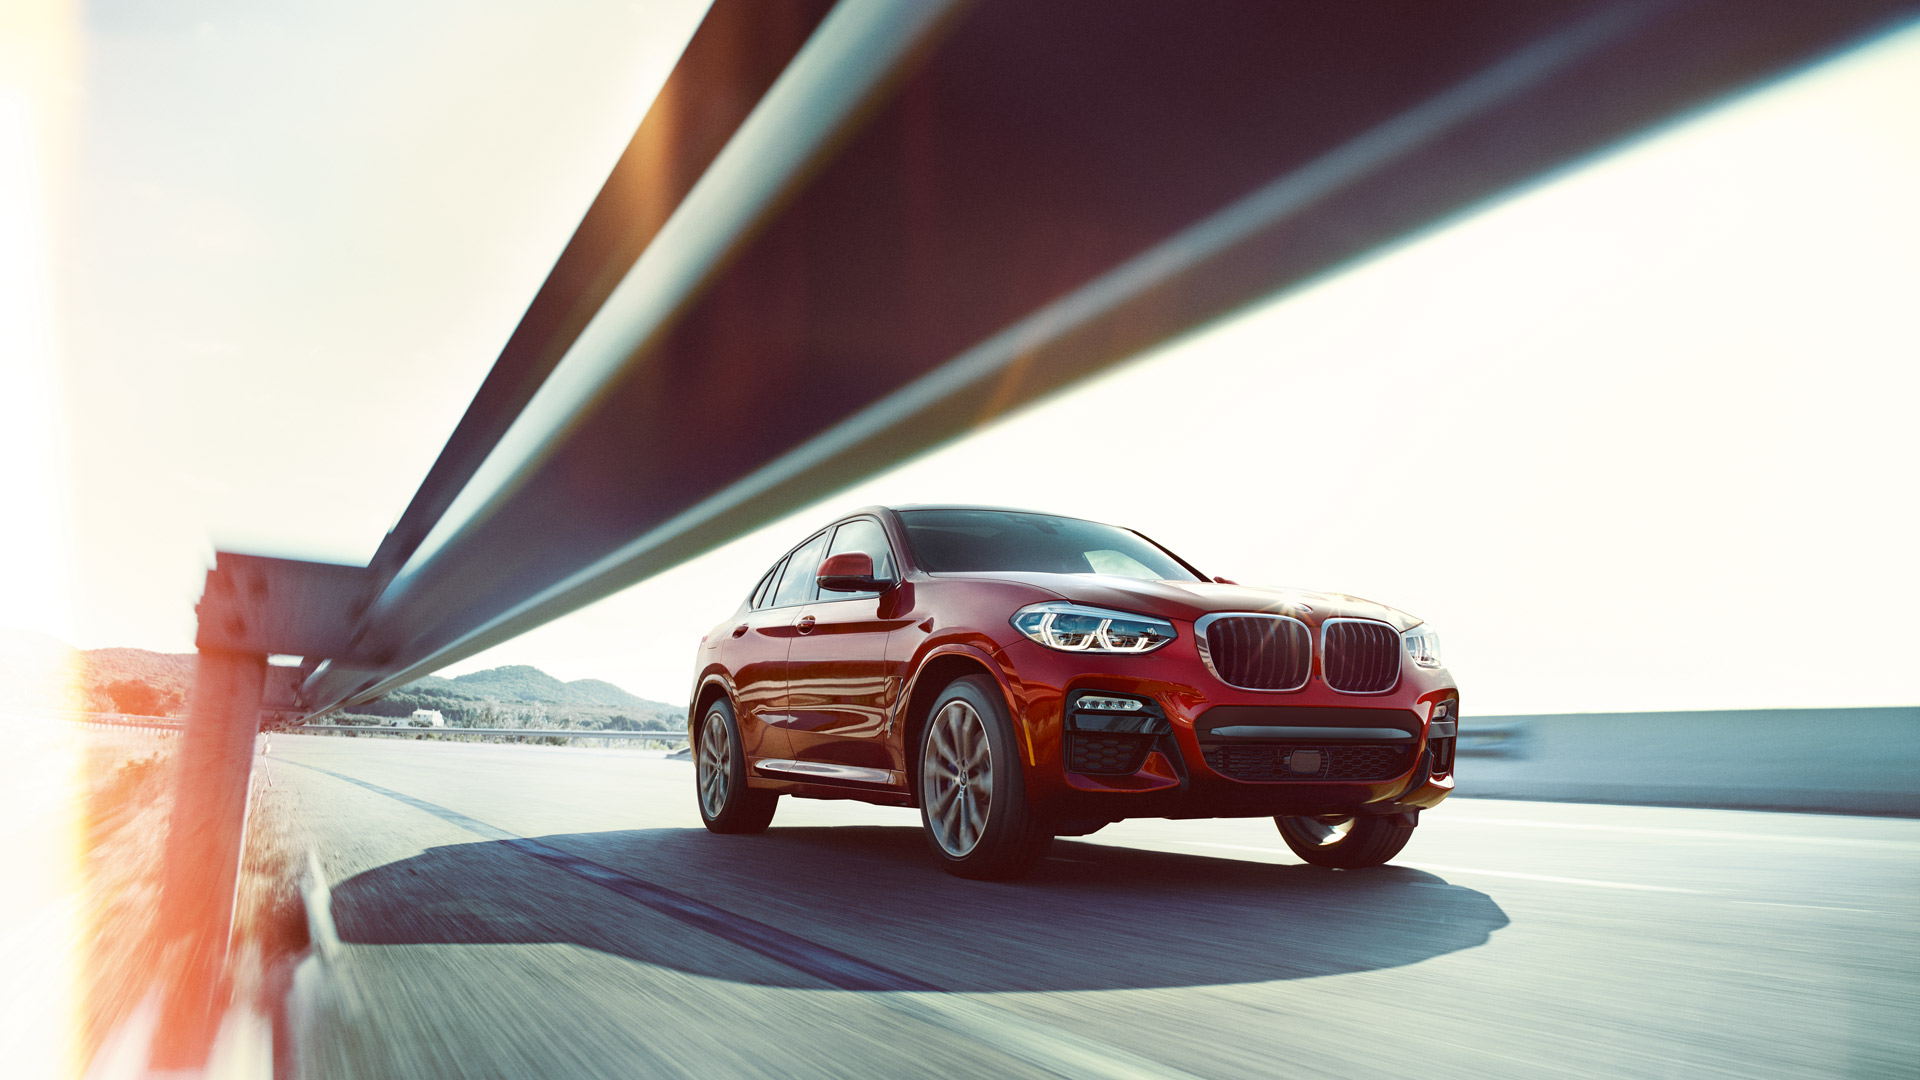 General 1920x1080 BMW BMW X4 German cars car red cars frontal view road SUV